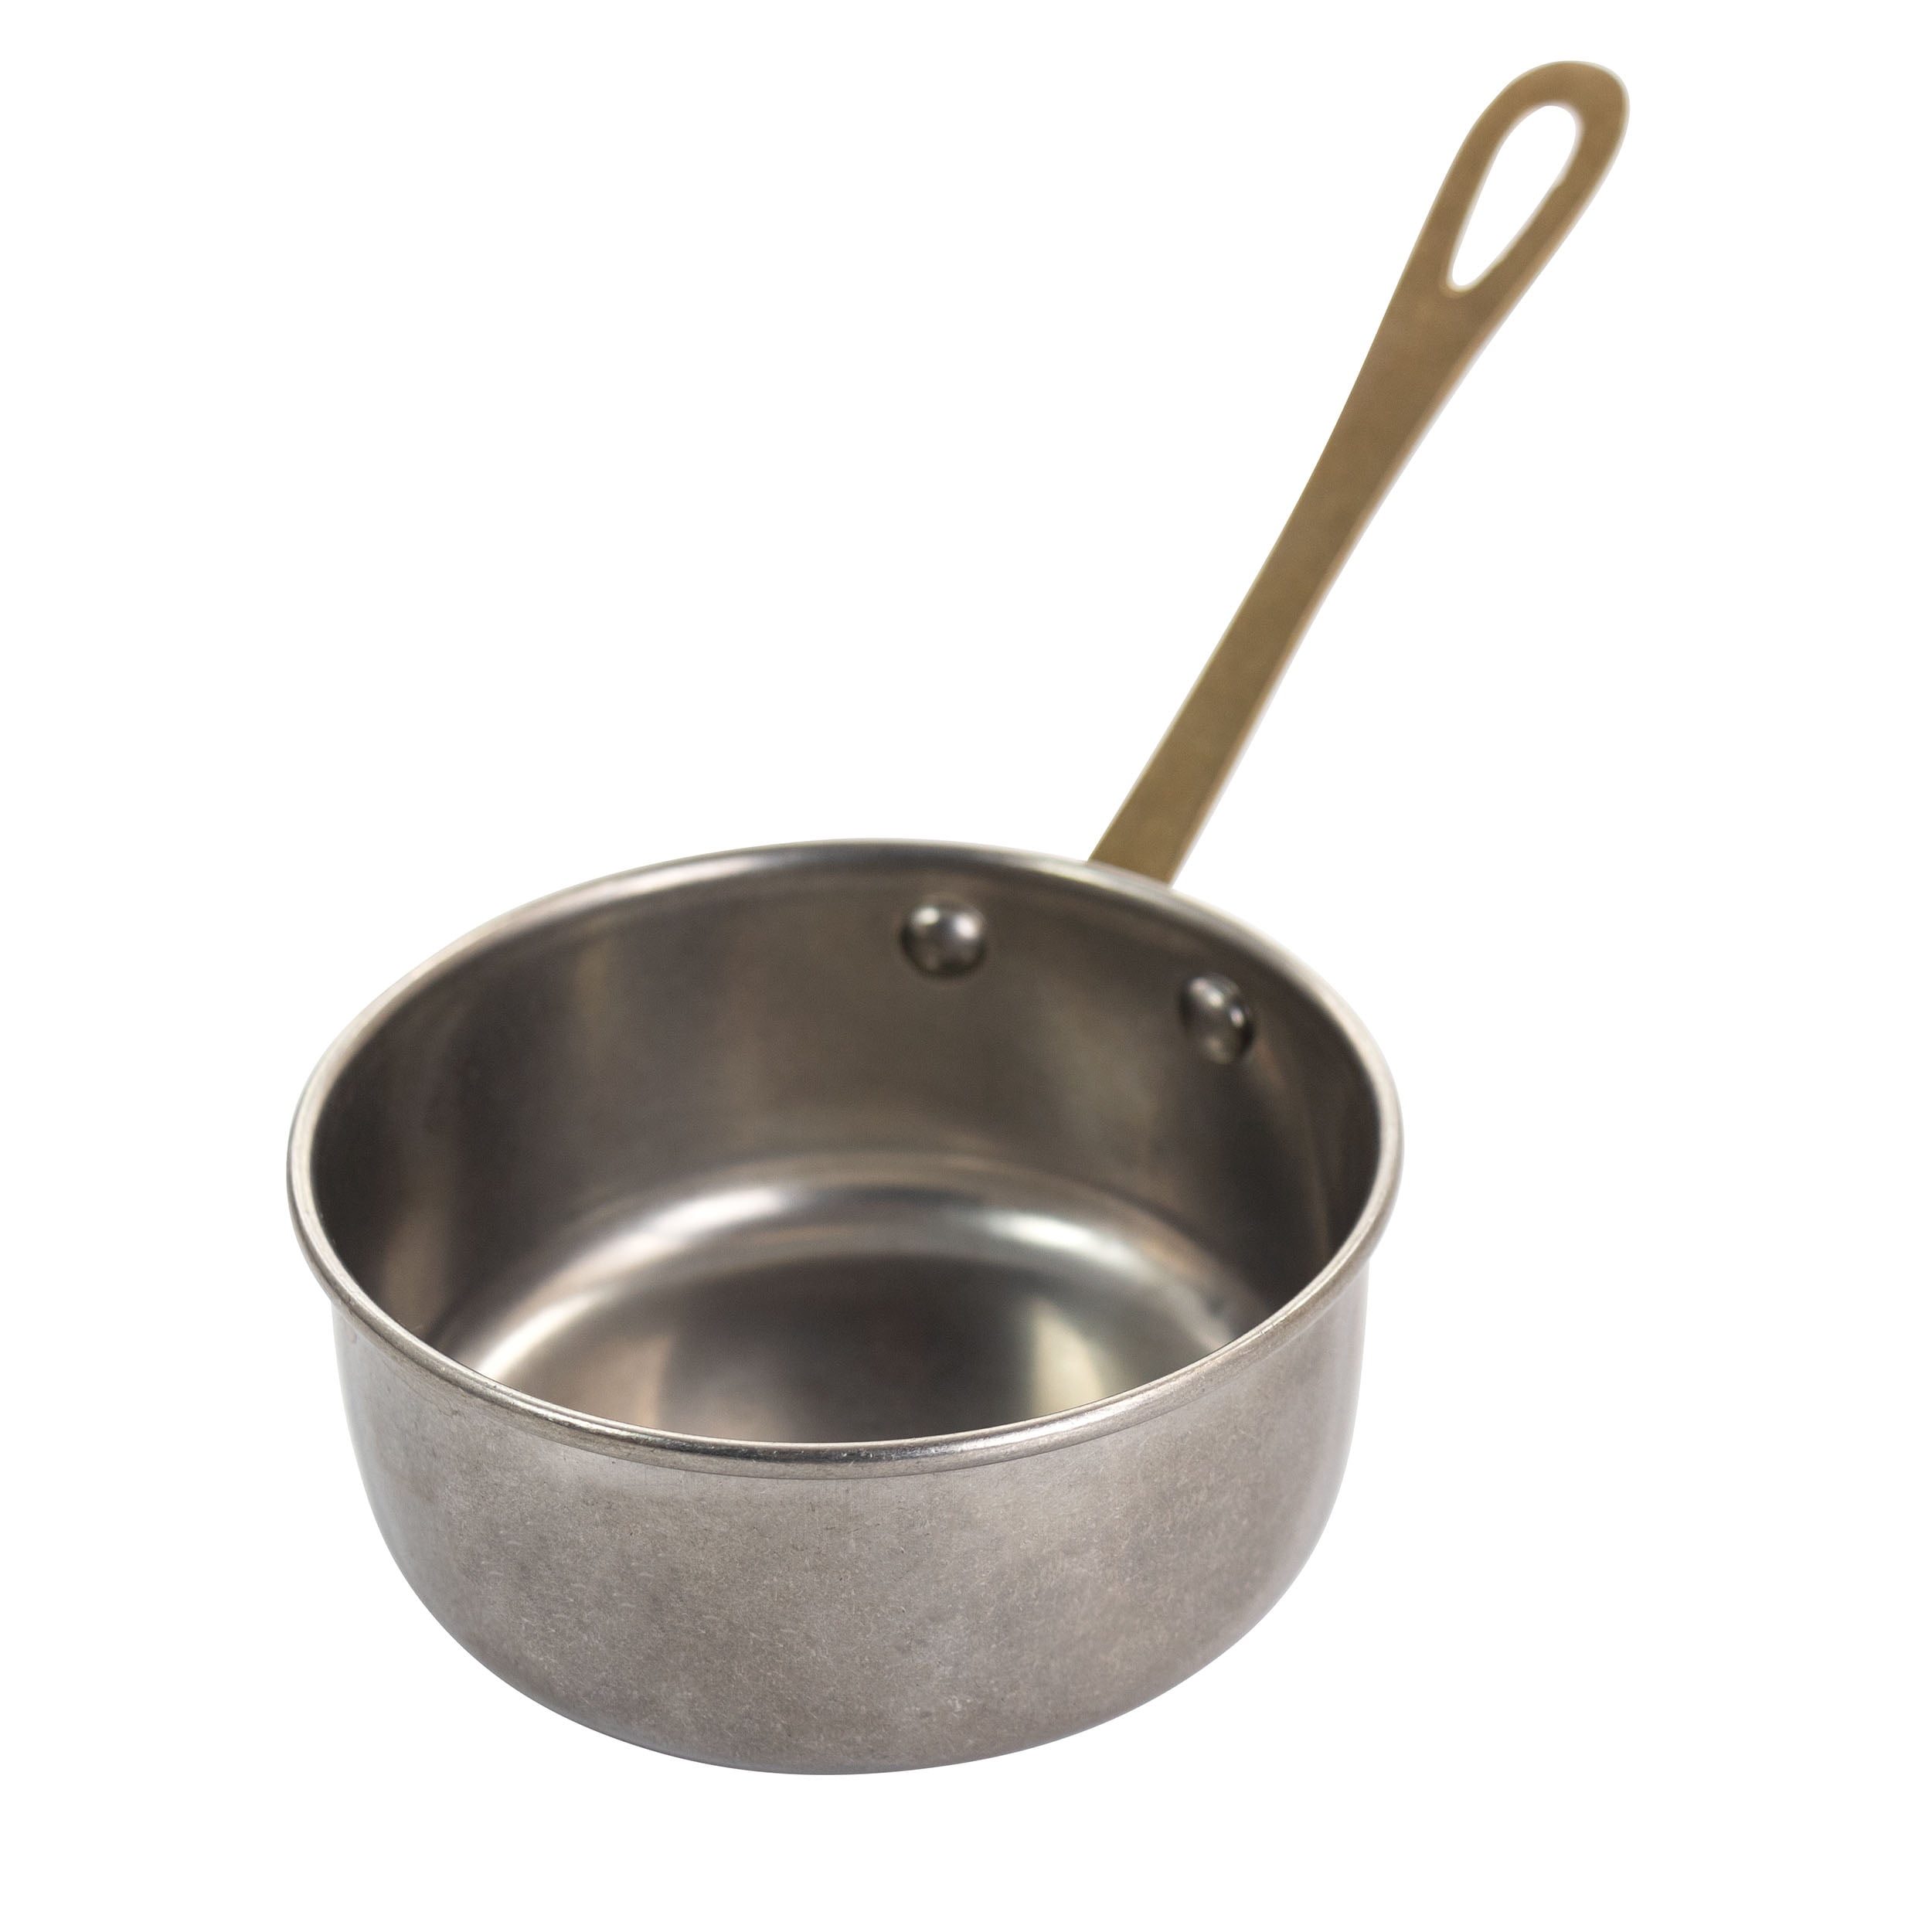 With Handle Sauce Pan Portable Mini Soup Pot Round Stainless Steel Flat-bottomed 